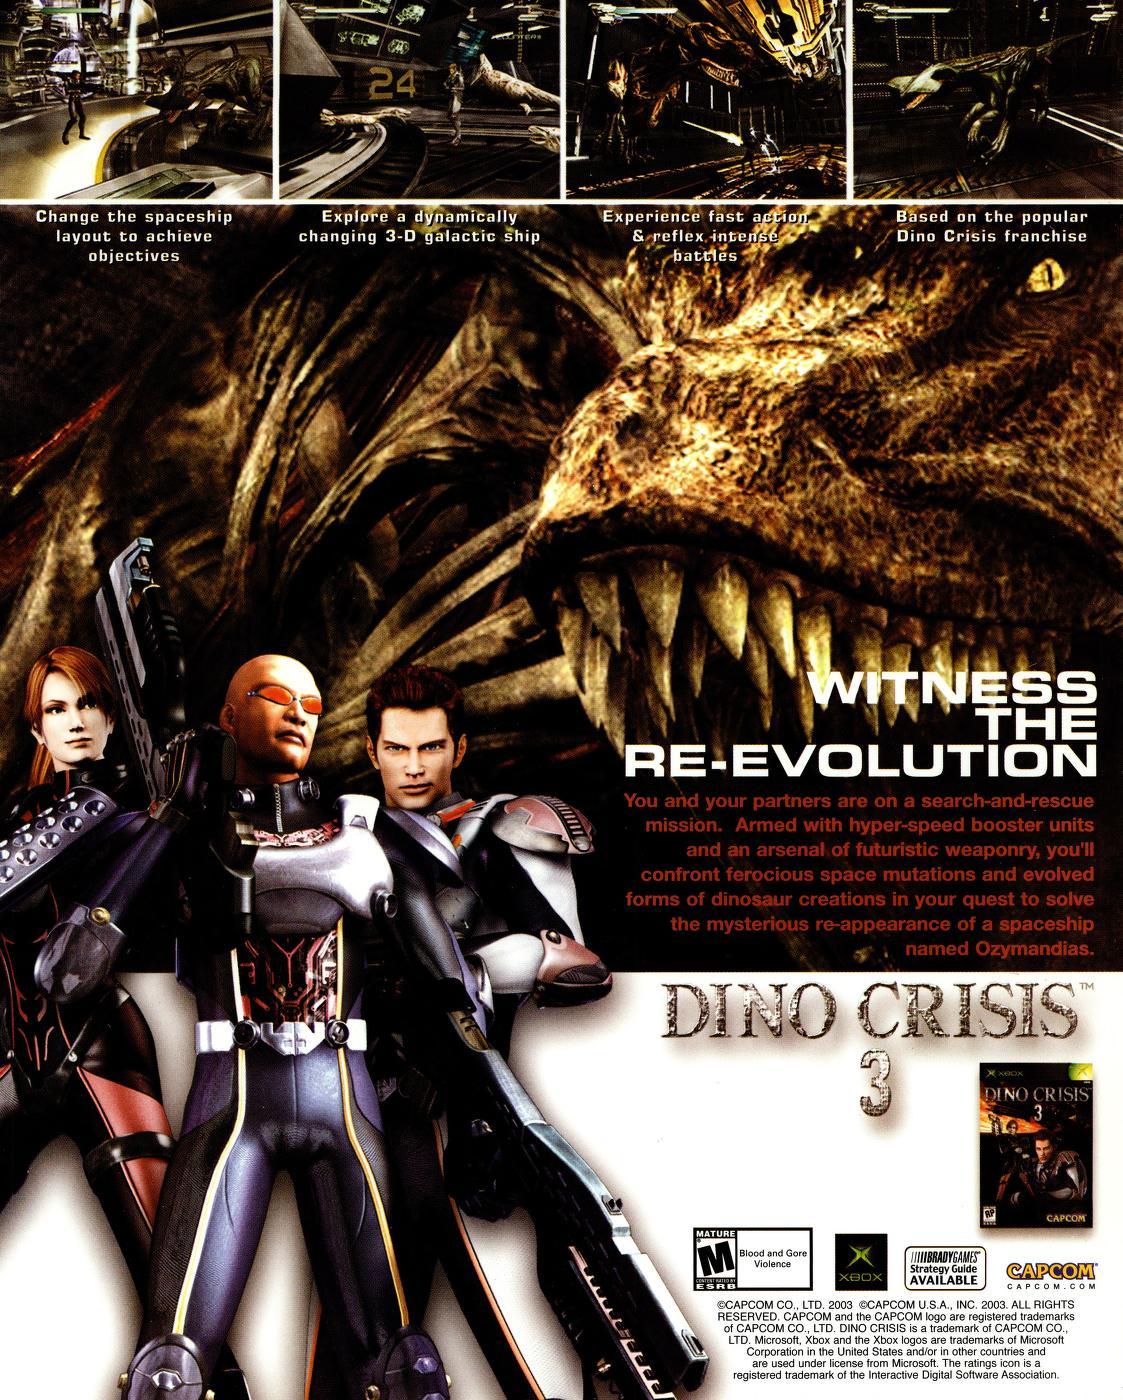 ‘Dino Crisis 3′[XBOX] [USA] [MAGAZINE] [2003]
• GMR, August 2003 (#7)
• Scanned by marktrade, via The Internet Archive